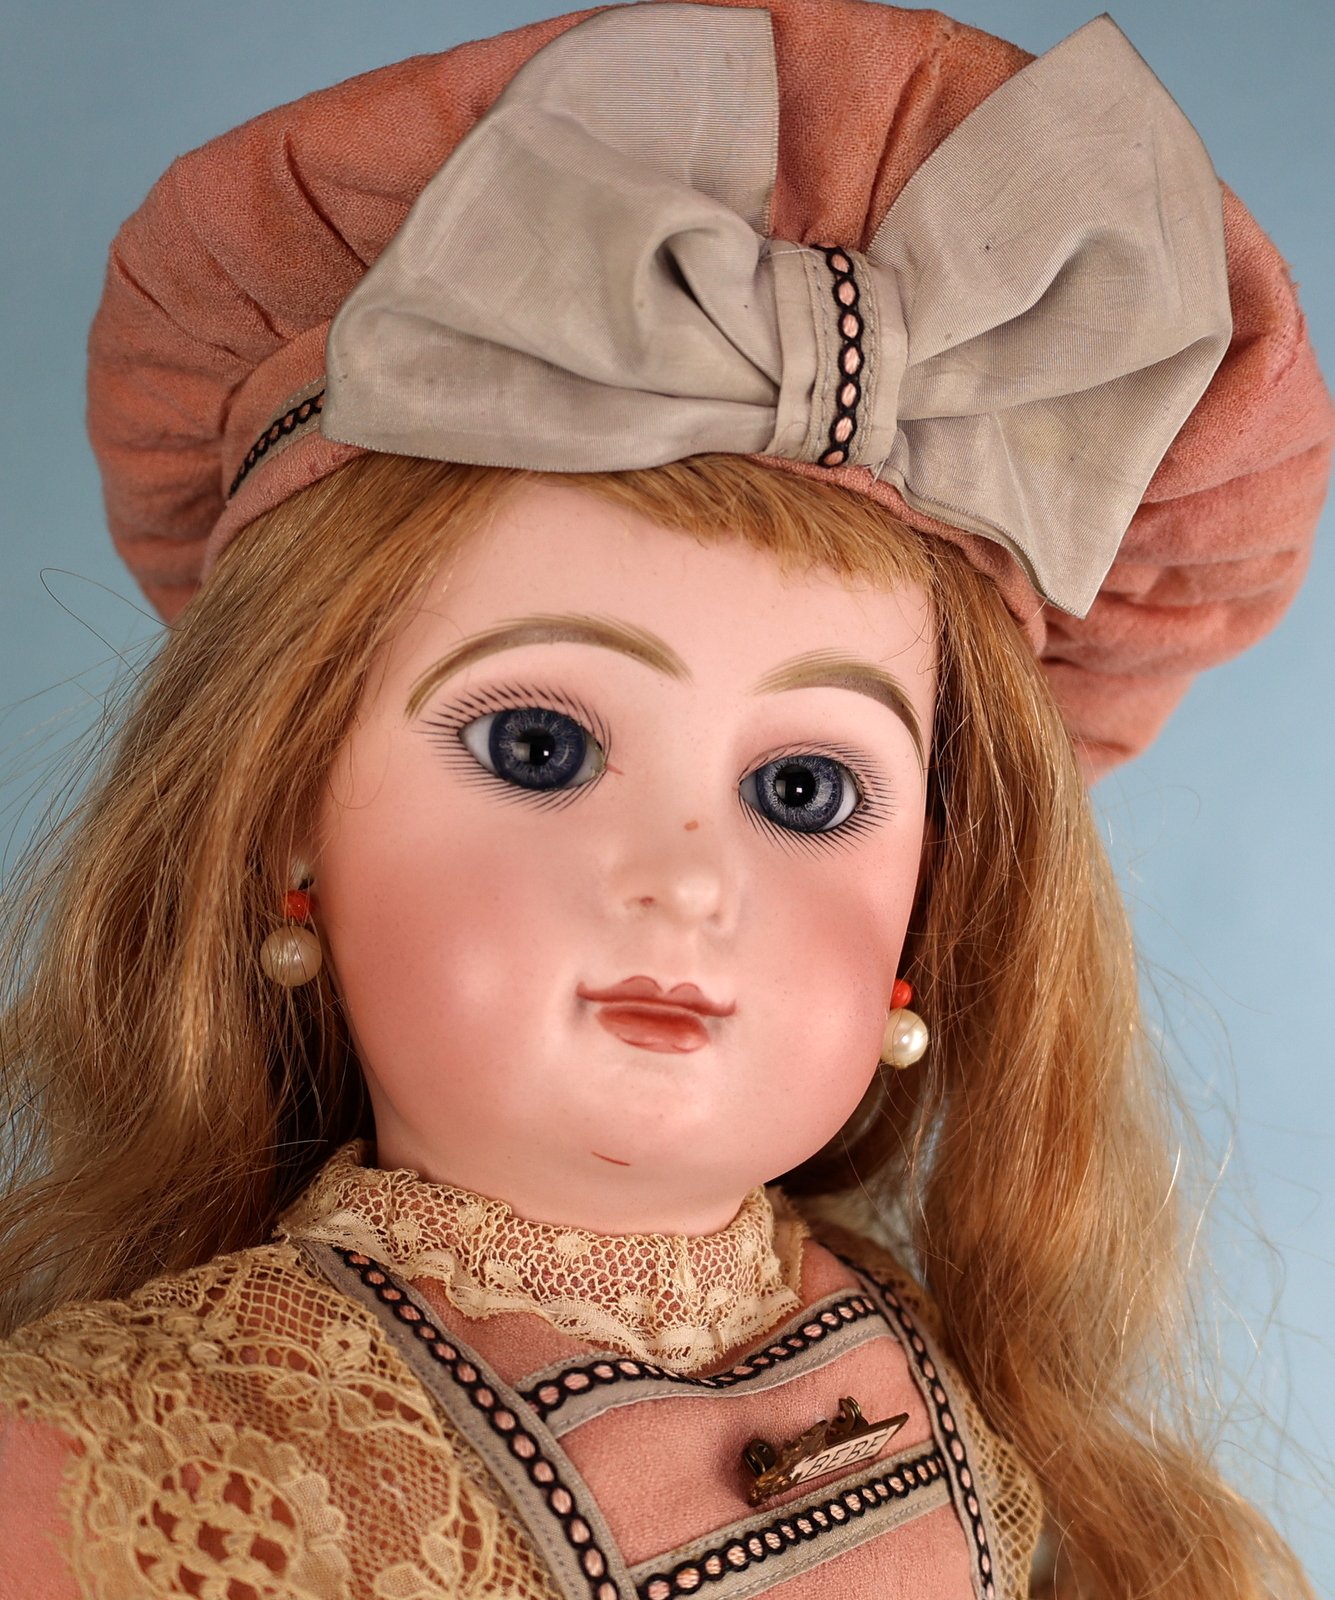 The Complete Book of All-Bisque Dolls